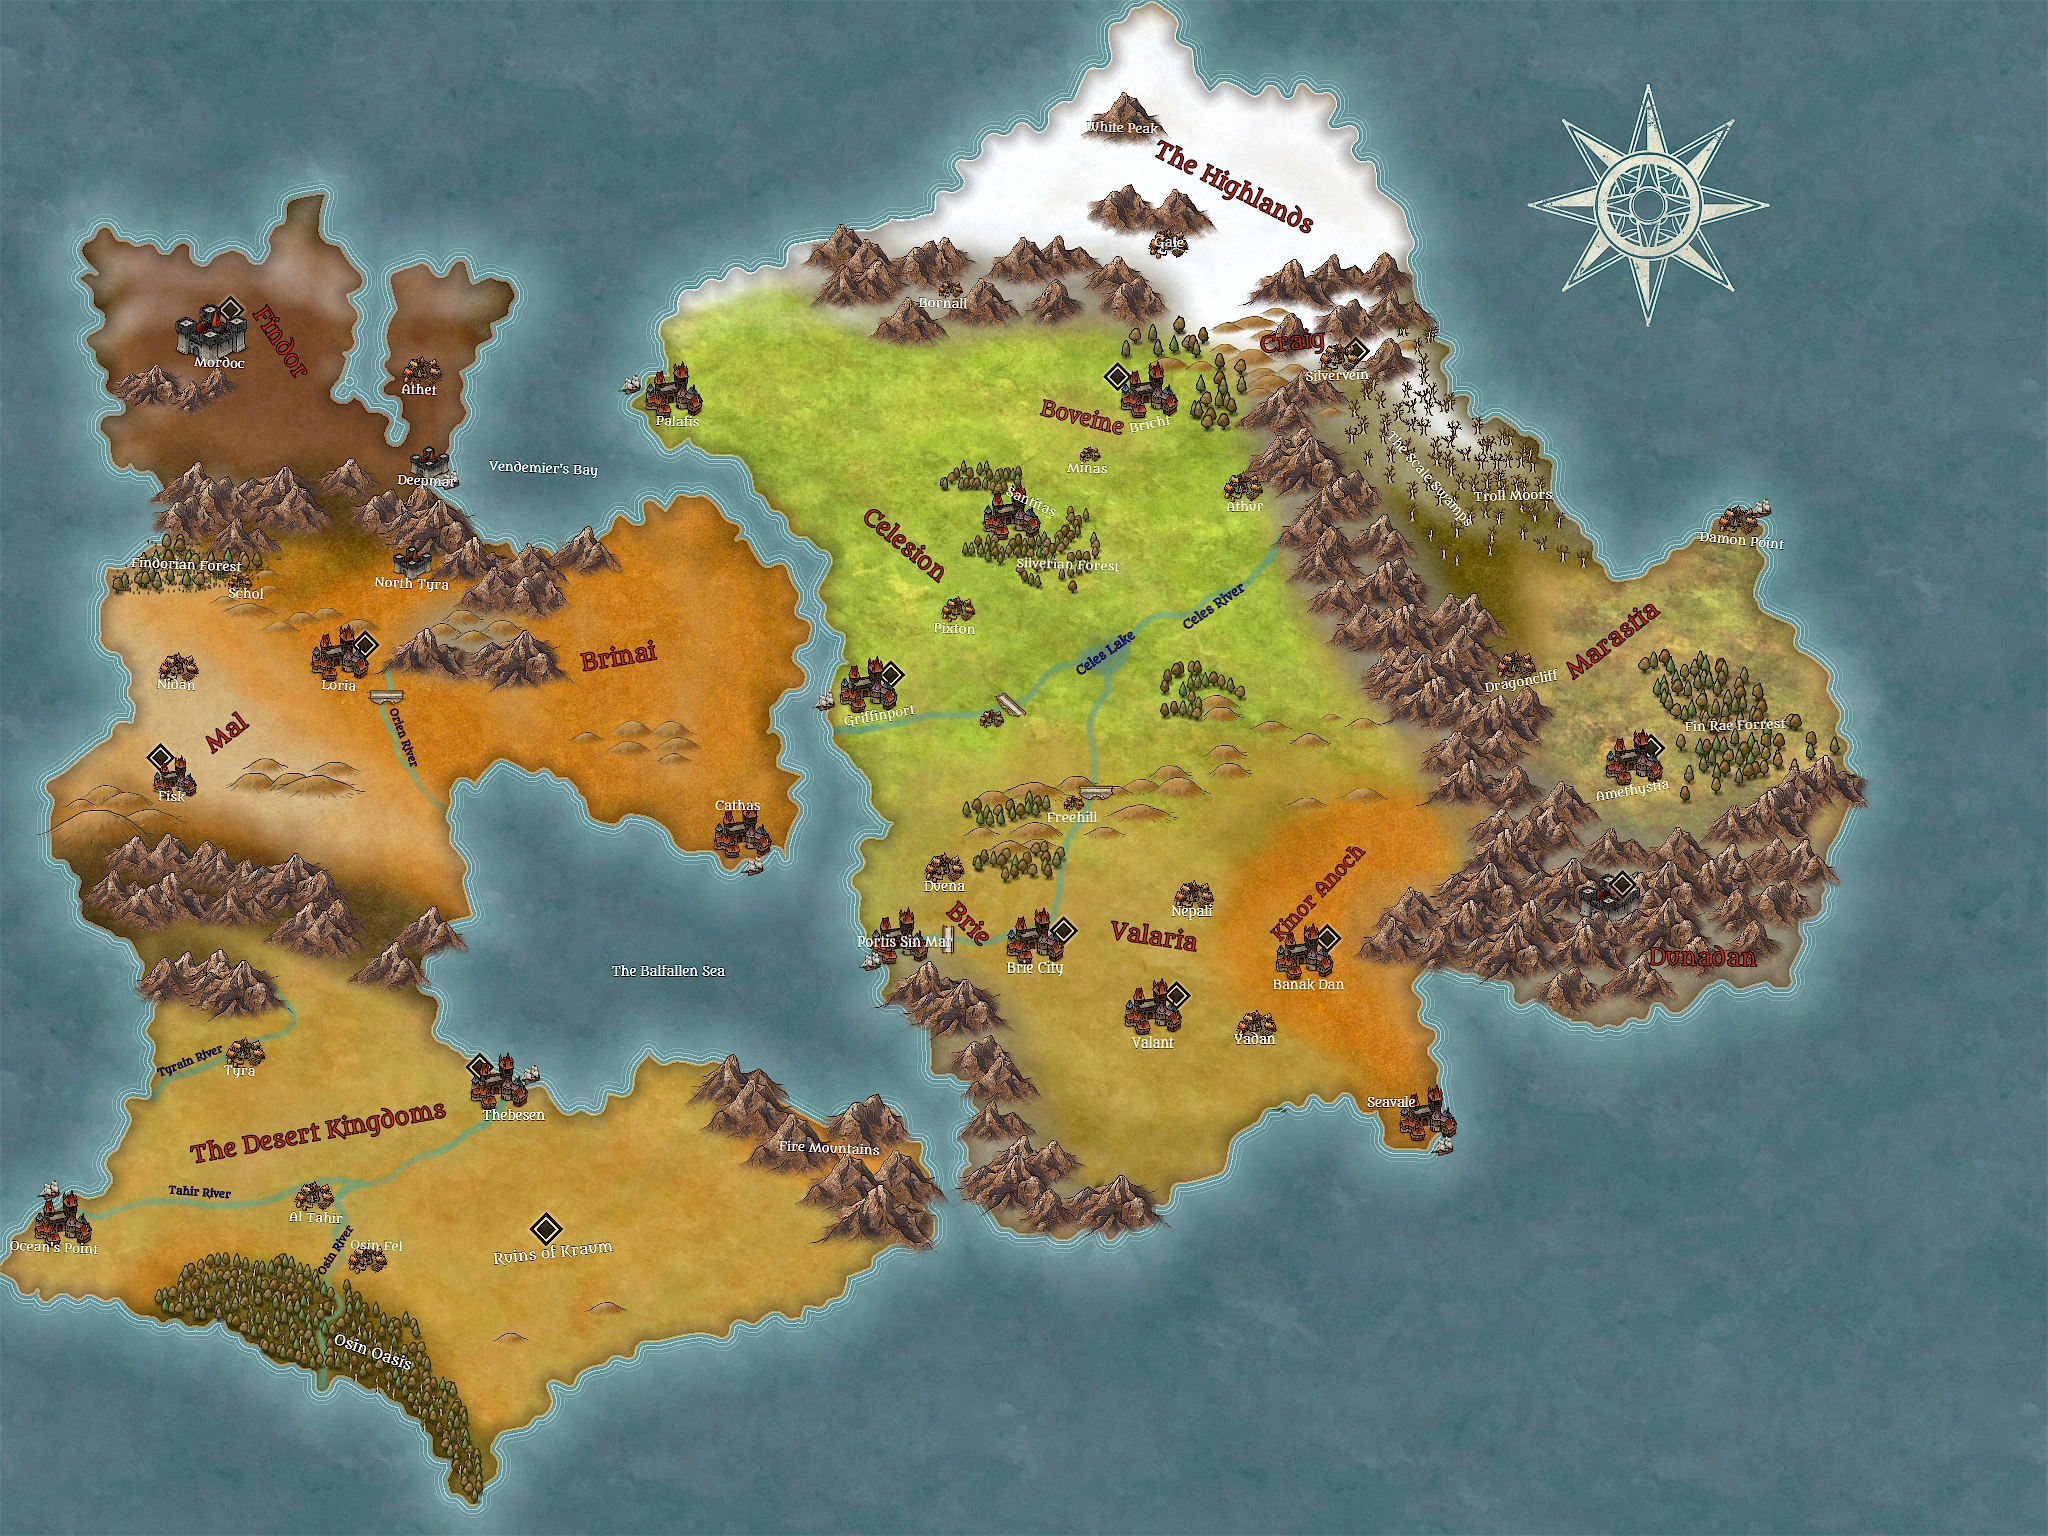 The Continent of Sharr